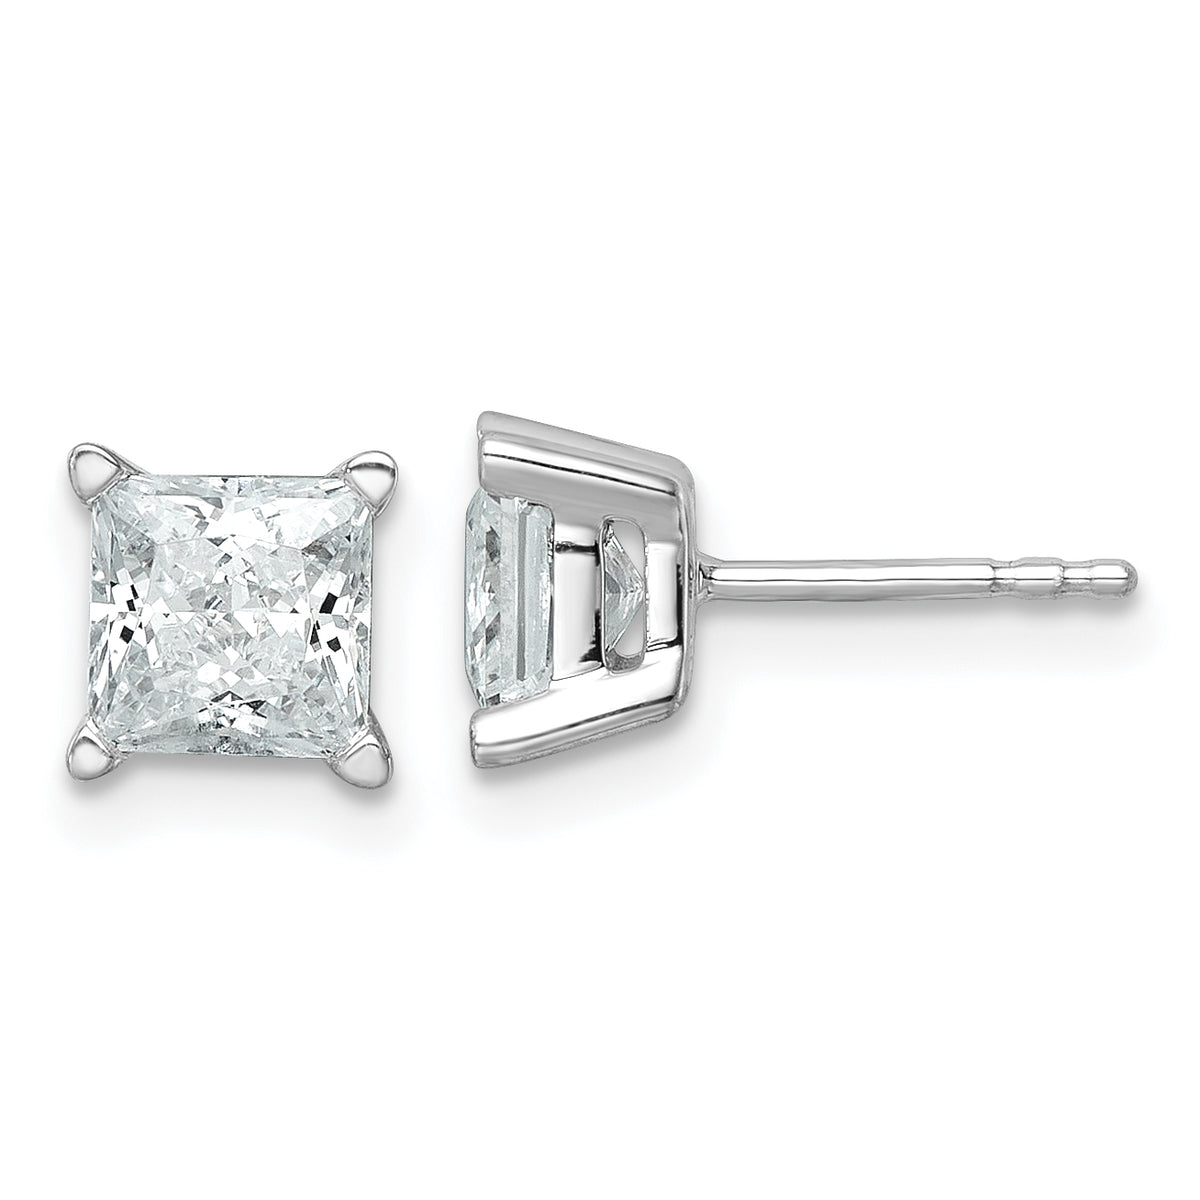 14k White Gold 2 carat total weight Princess VS/SI GH Lab Grown Diamond 4 Prong Stud Post Earrings